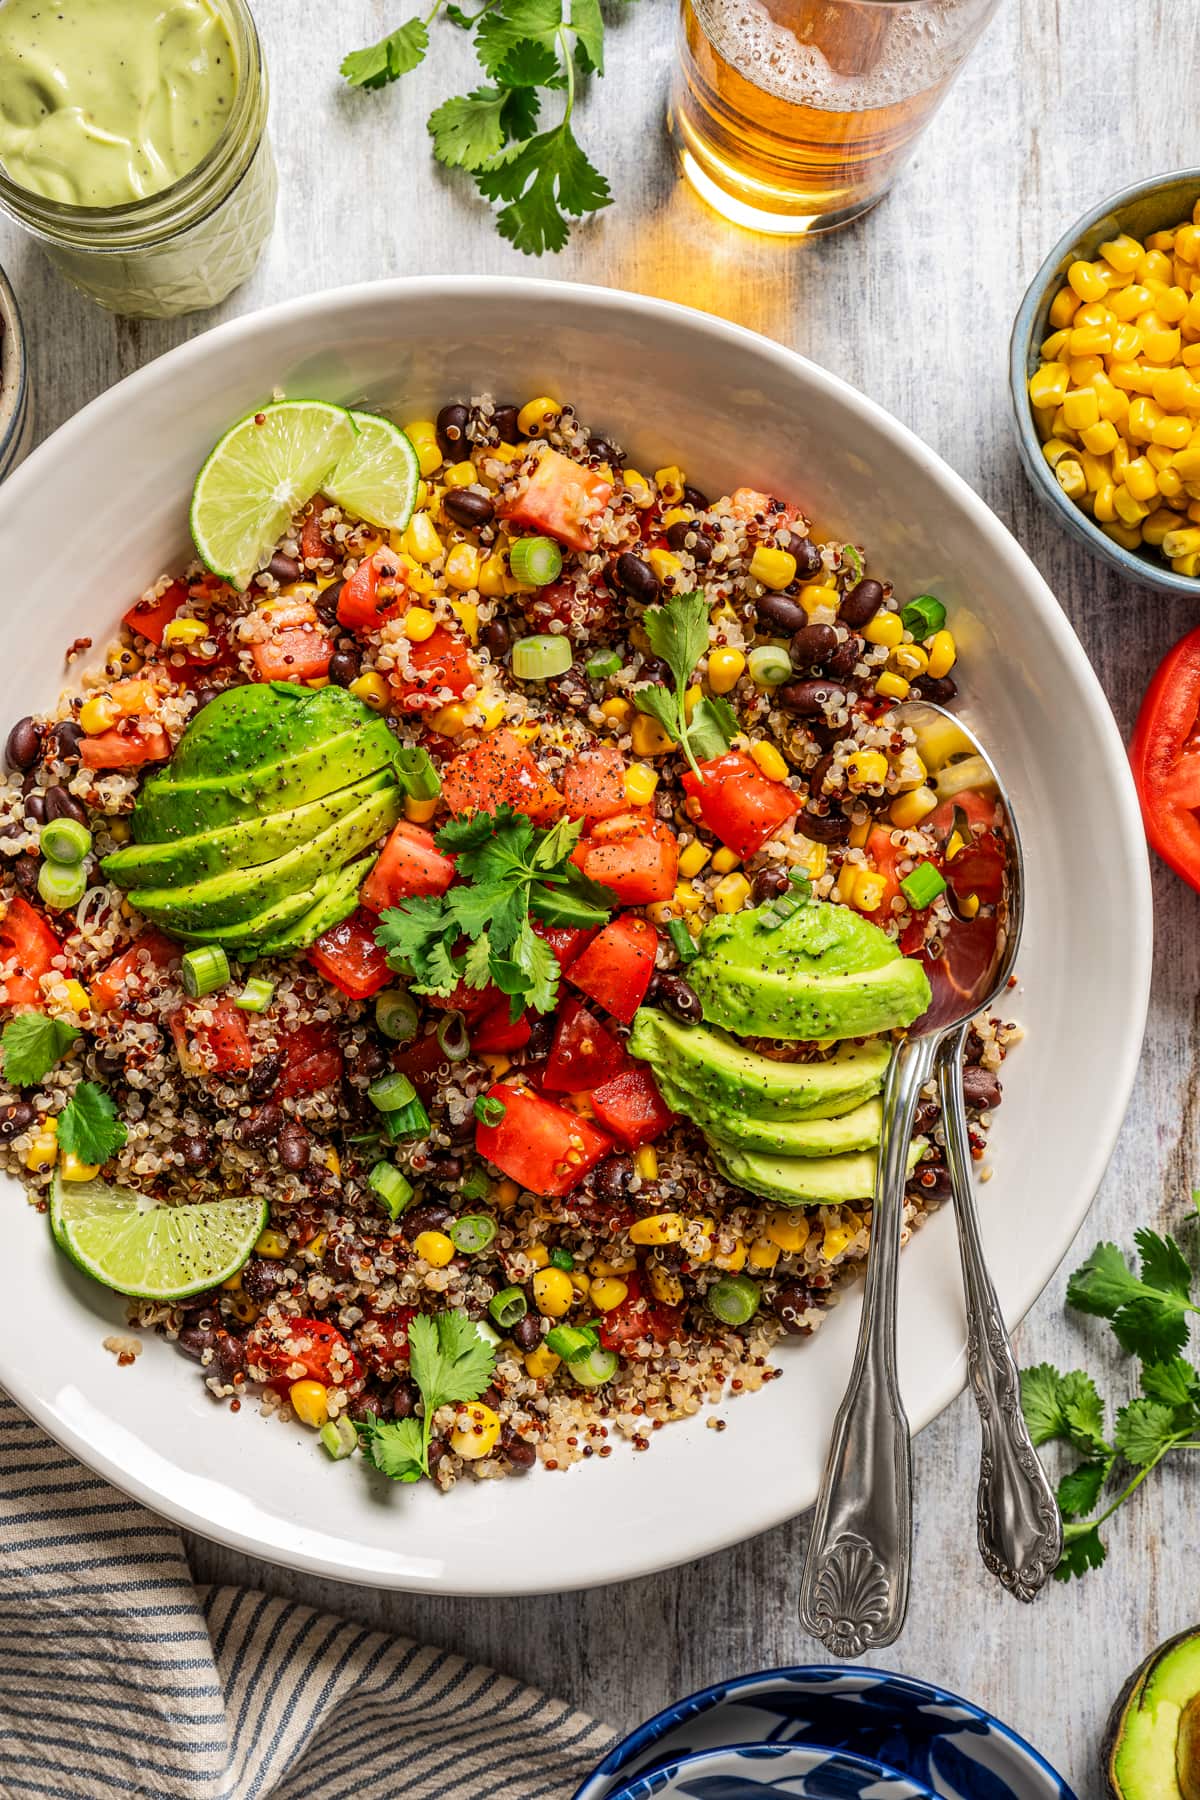 Aerial view image of a large quinoa salad in a salad bowl tossed with black beans, corn, tomatoes, and slices of avocado.